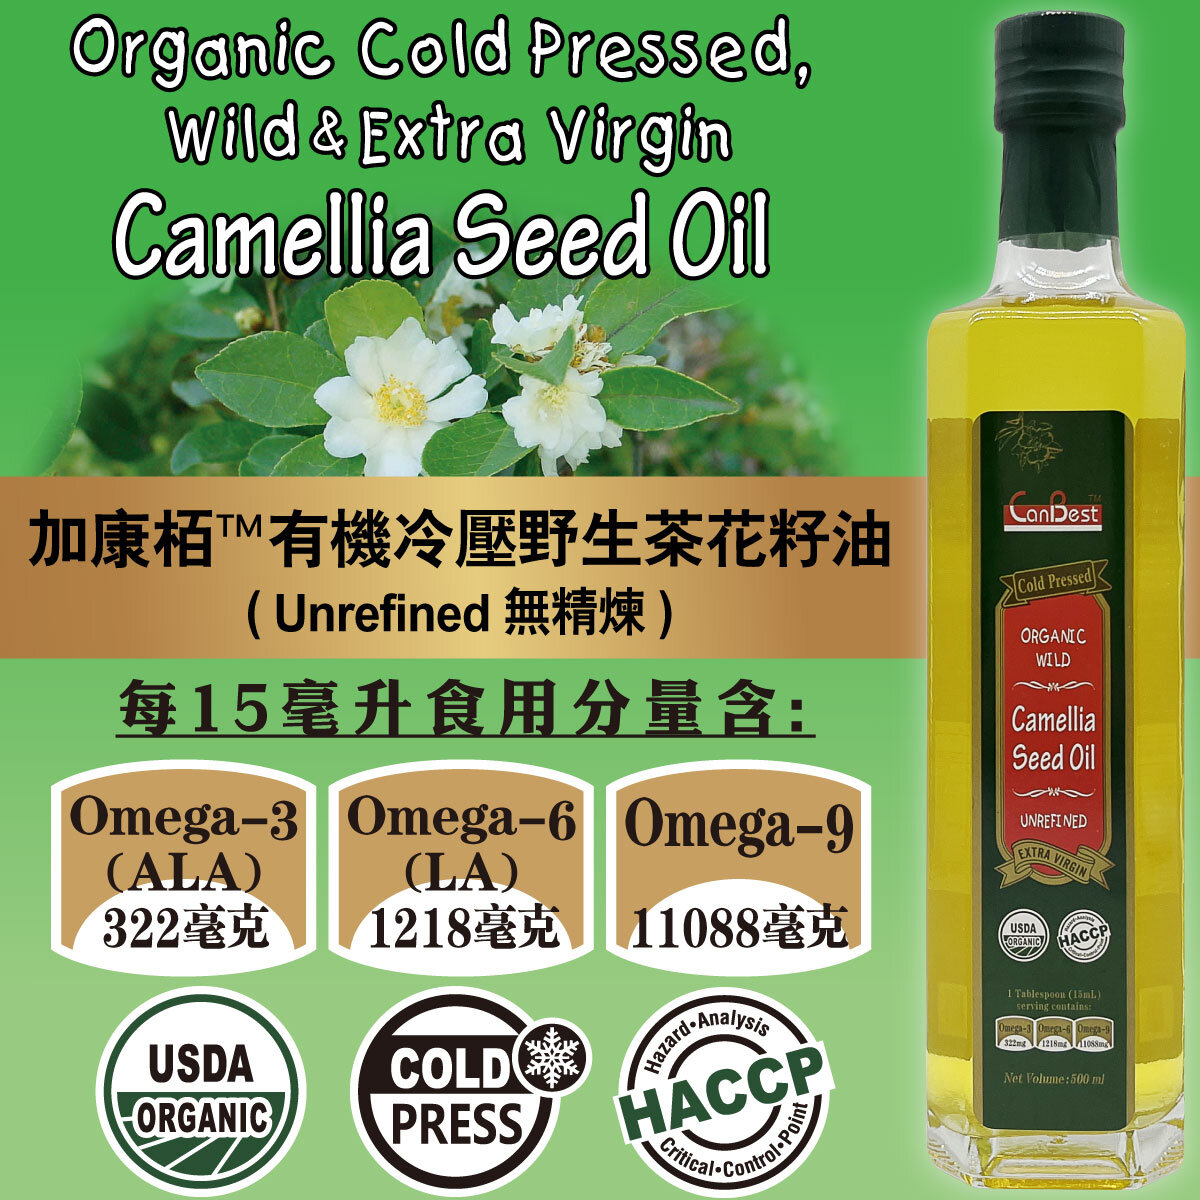 CanBest Organic Cold Pressed & Wild Camellia Oil (Unrefined) | Yue Hwa  Online Shop